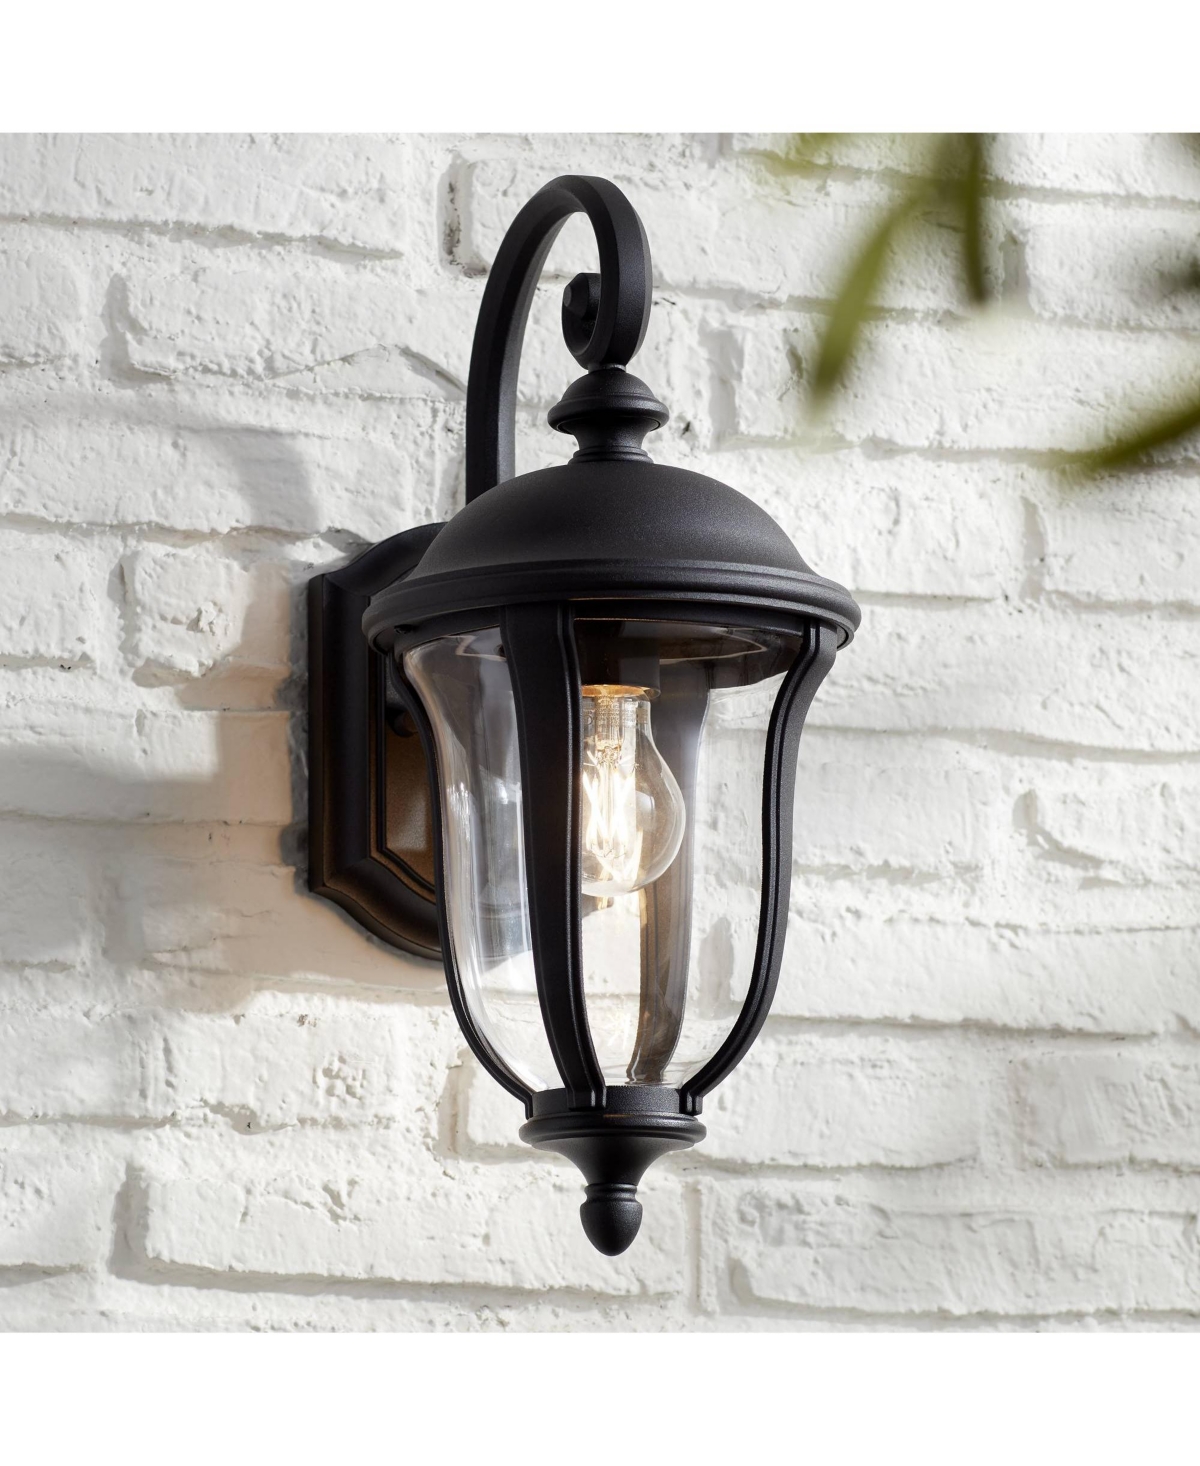 Park Sienna Vintage-like Outdoor Wall Light Fixture Black 16 3/4" Clear Glass Scrolling Down bridge for Exterior House Porch Patio Outside Deck Garage